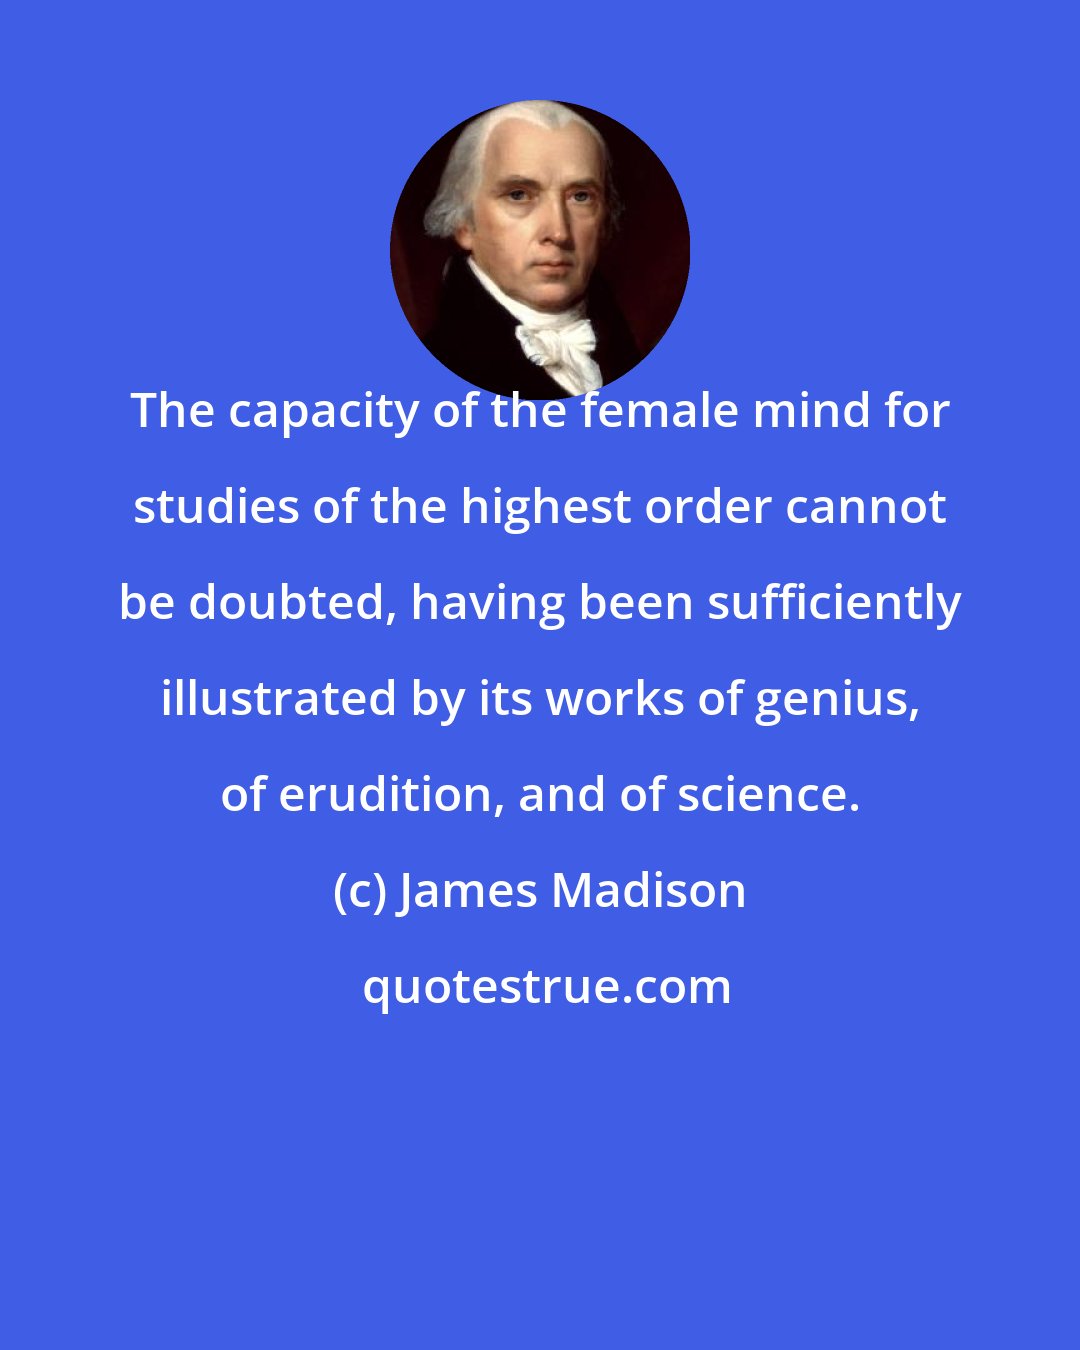 James Madison: The capacity of the female mind for studies of the highest order cannot be doubted, having been sufficiently illustrated by its works of genius, of erudition, and of science.